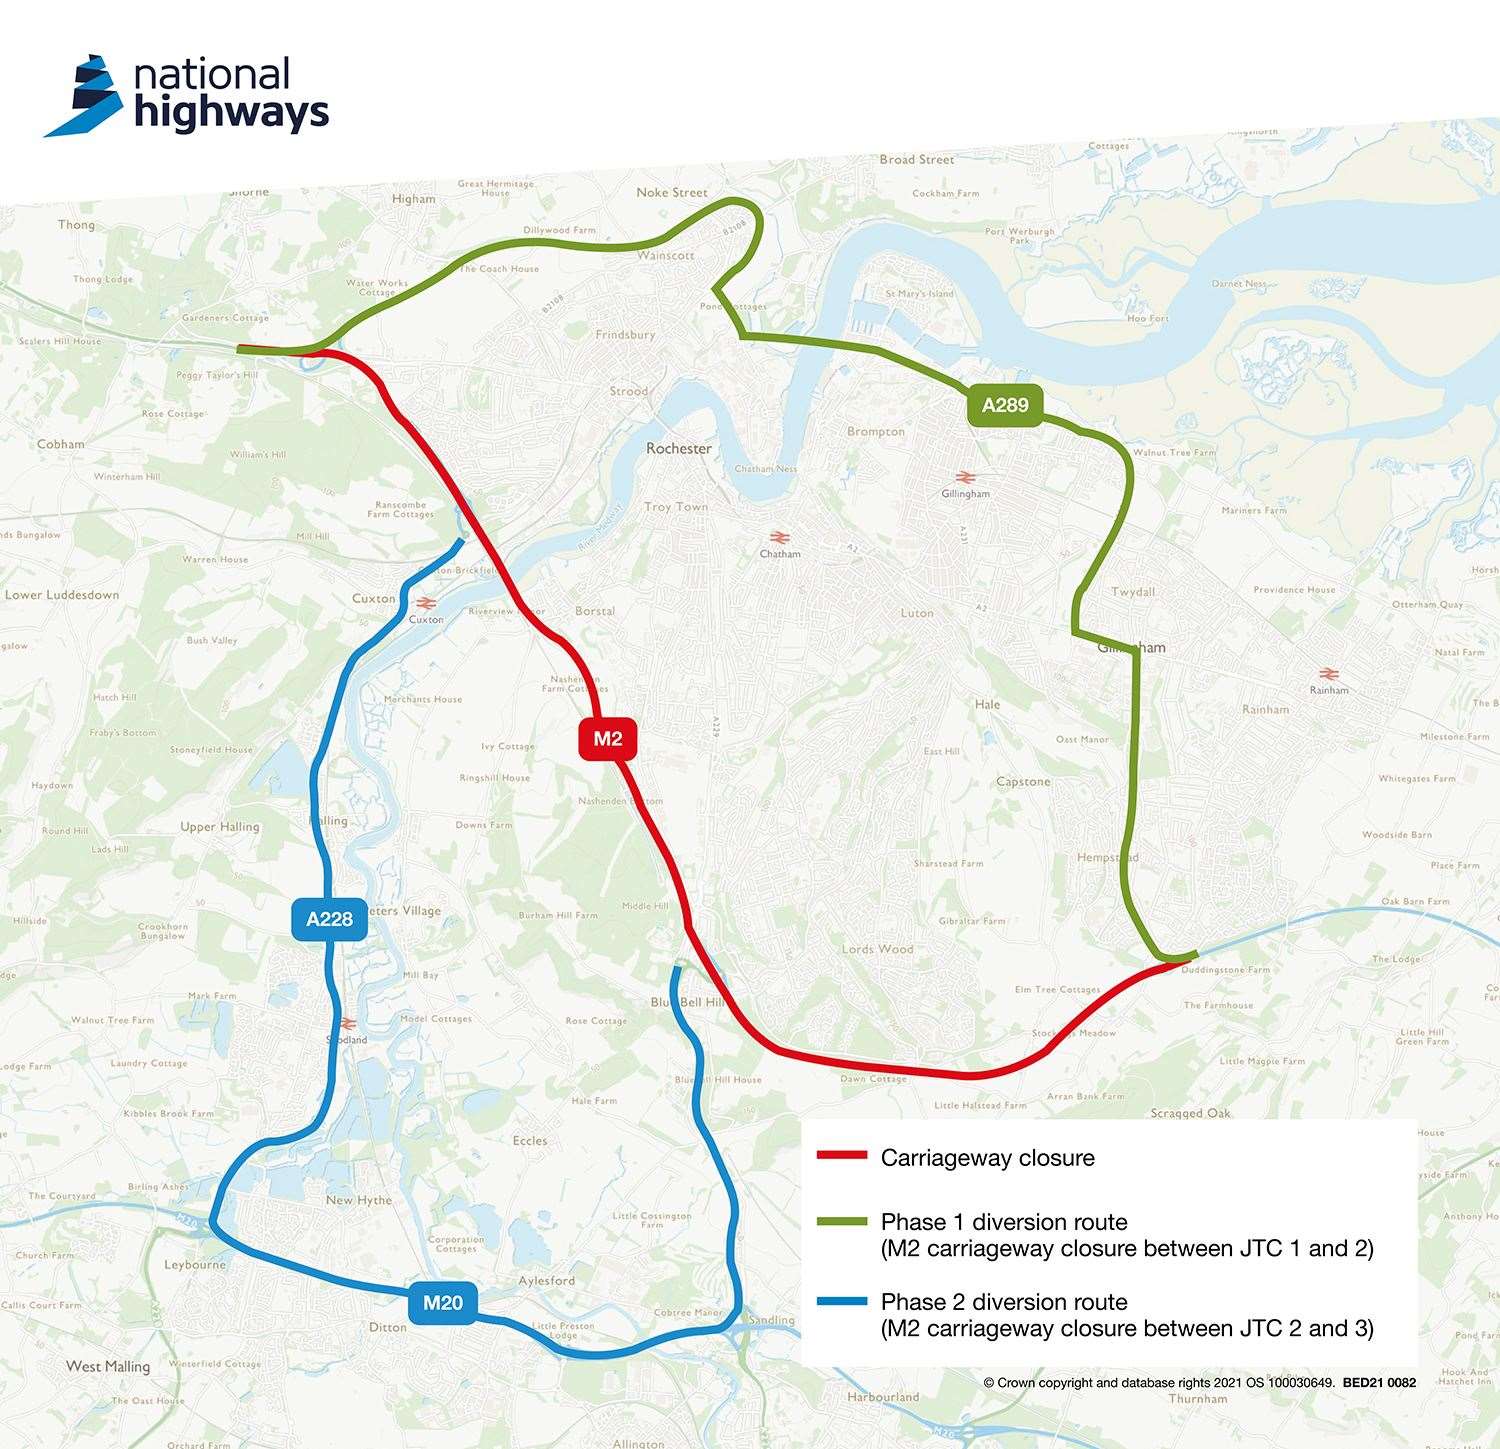 Diversions will be in place during the closure of the M2. Image from National Highways